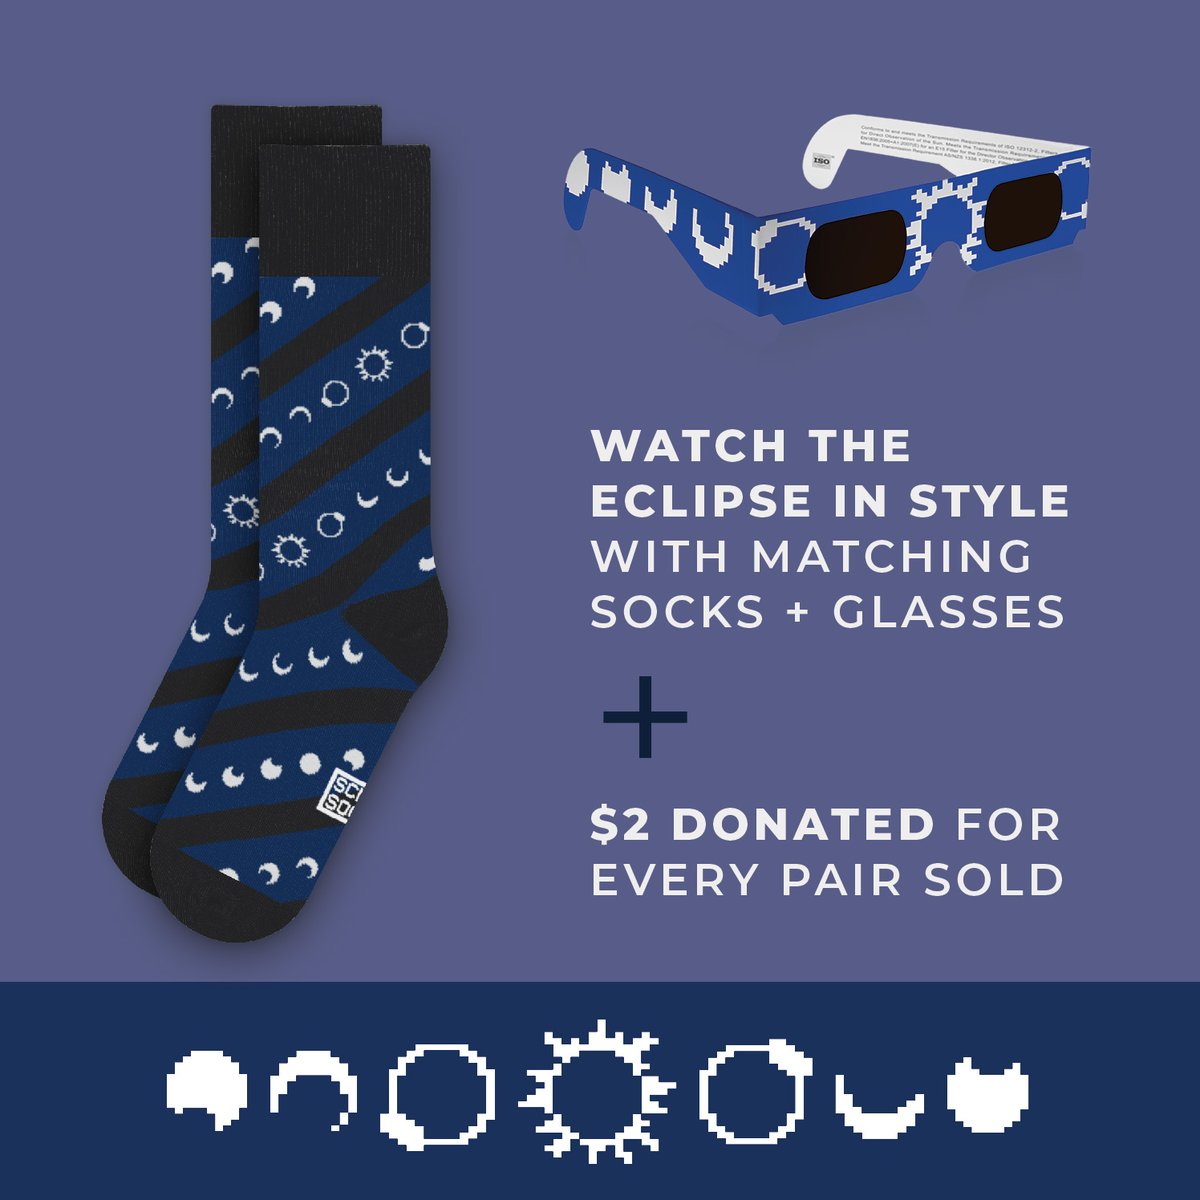 Yesterday we raised $240 for my favorite STEM charity @reinventedmag with the launch of our #SolarEclipse #socks 🤩 Now help me double that! 🤑 I will donate: $2 for every pair sold $1 for every repost Get your eclipse socks here: 🔗 sciencesocks.co/collections/ec… Please RT! 🙏